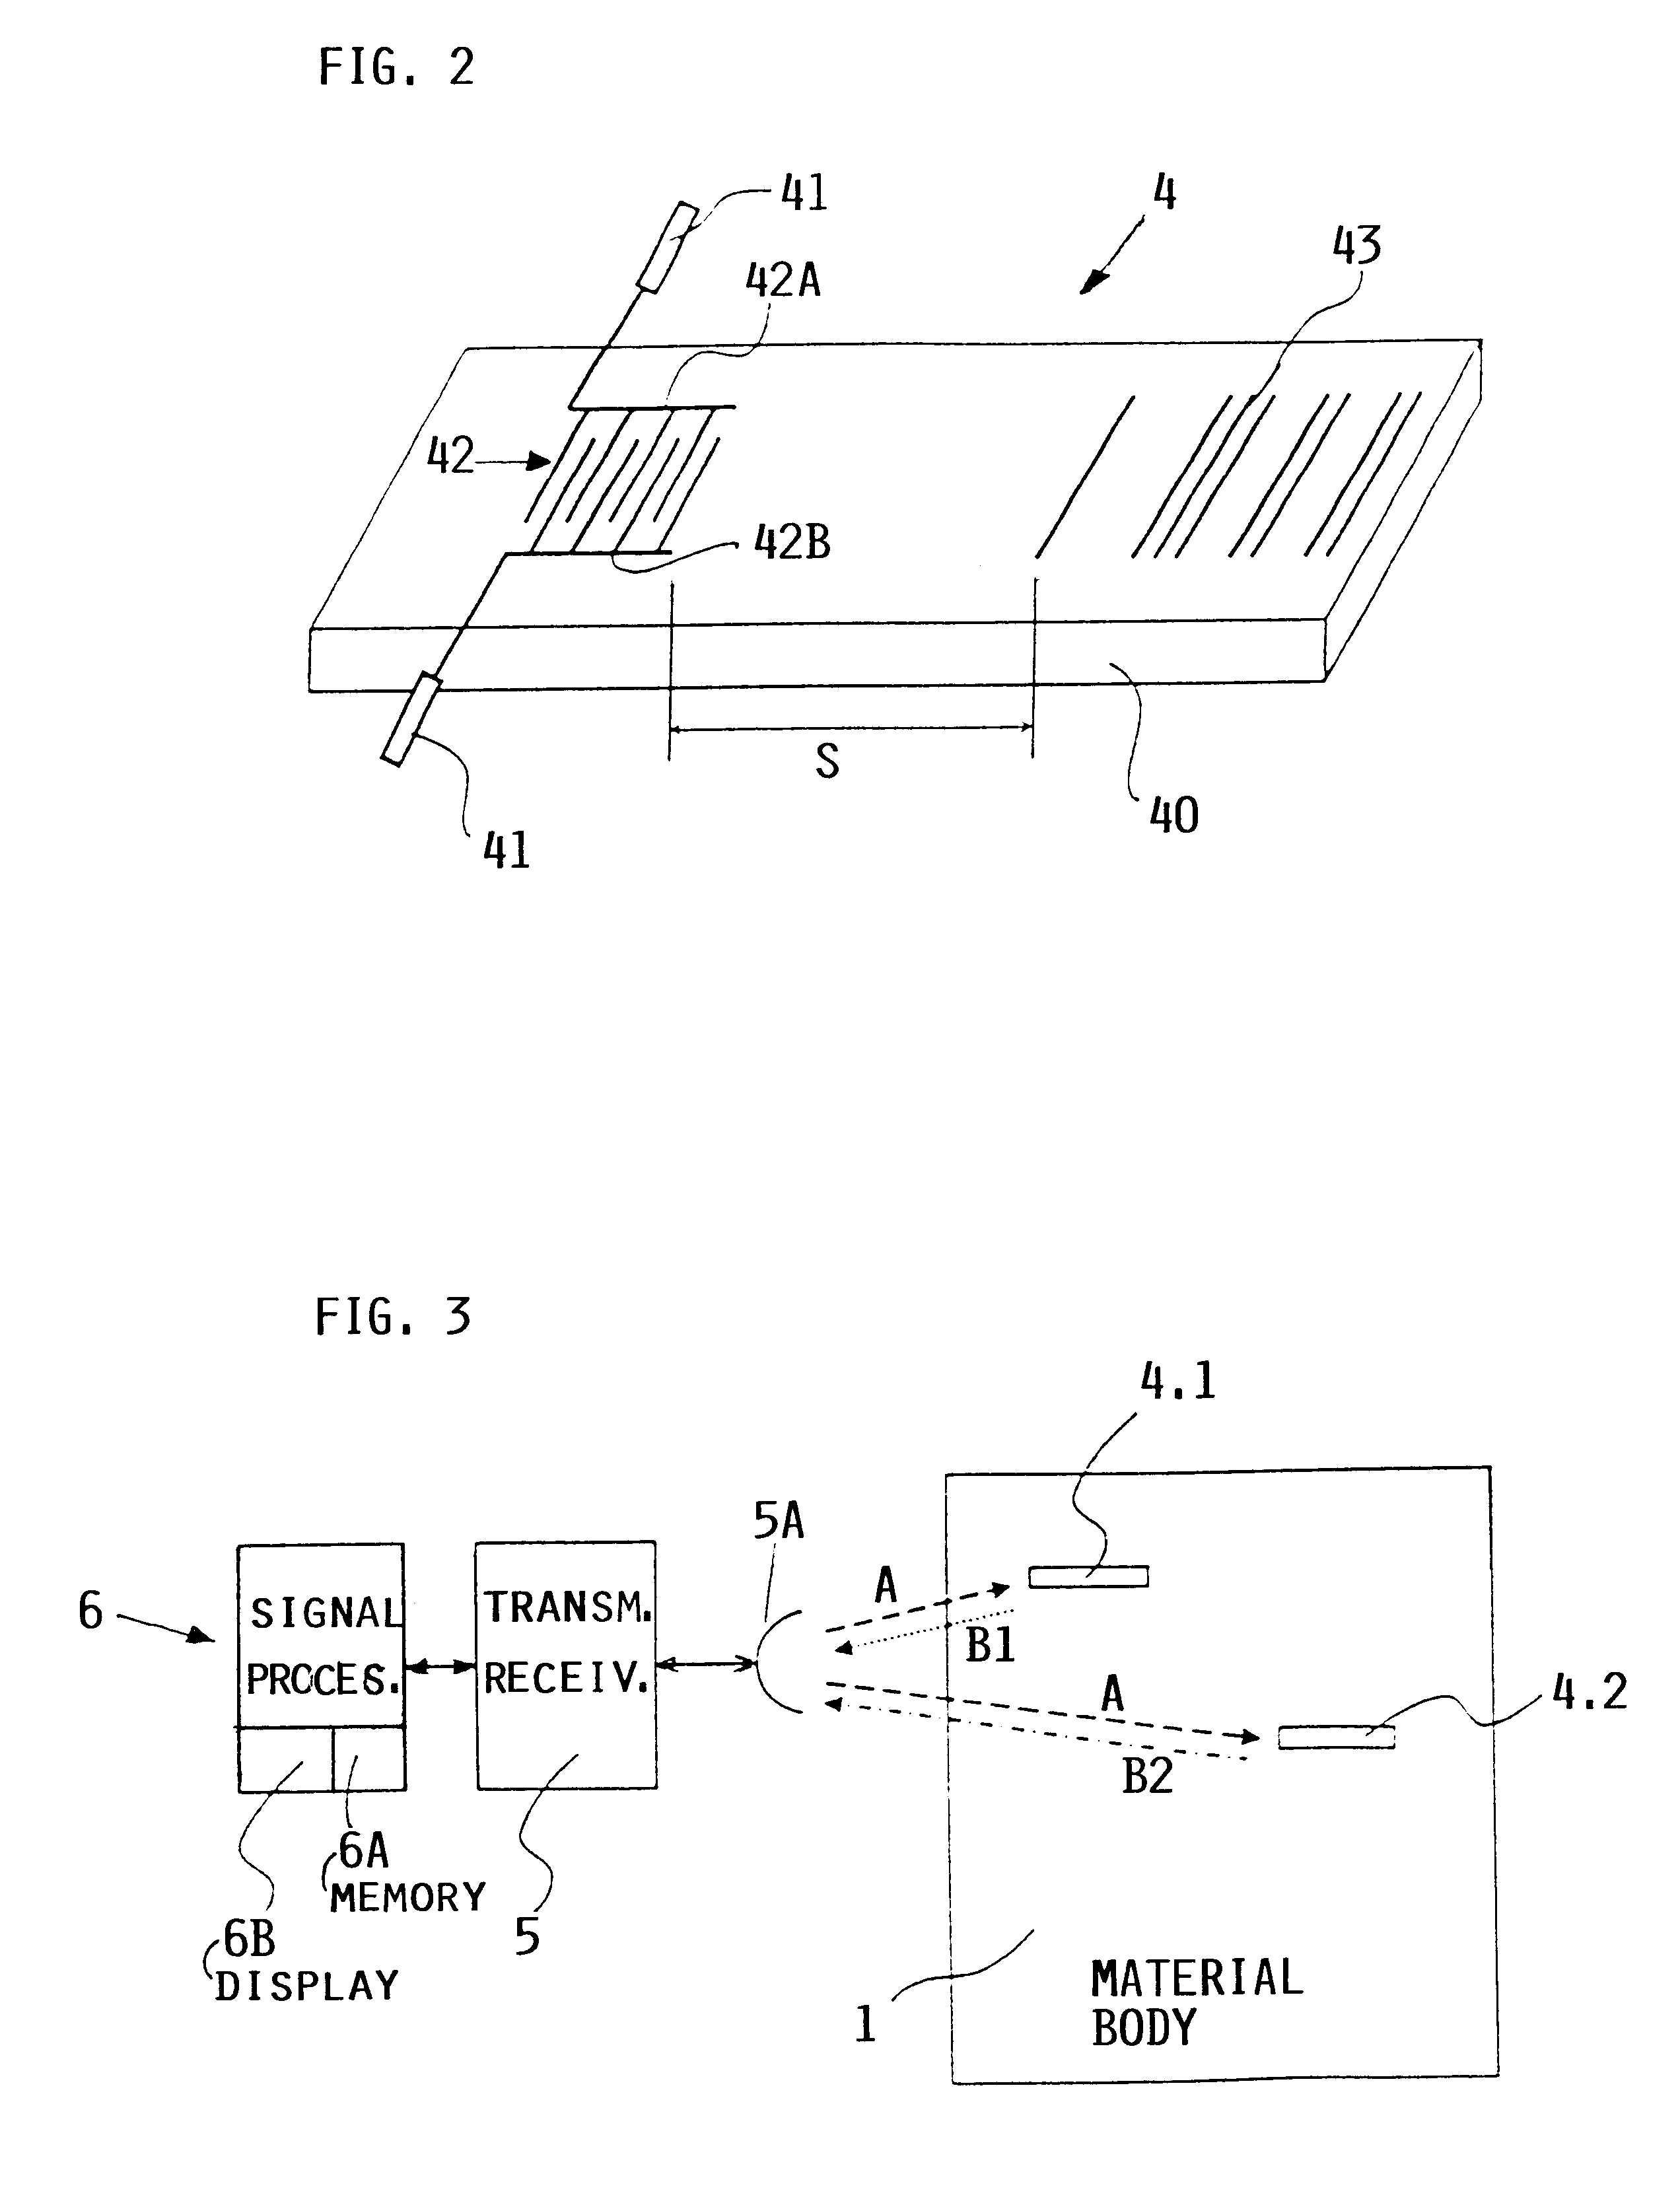 System and method for material testing, material suitable for such testing and method for producing such material